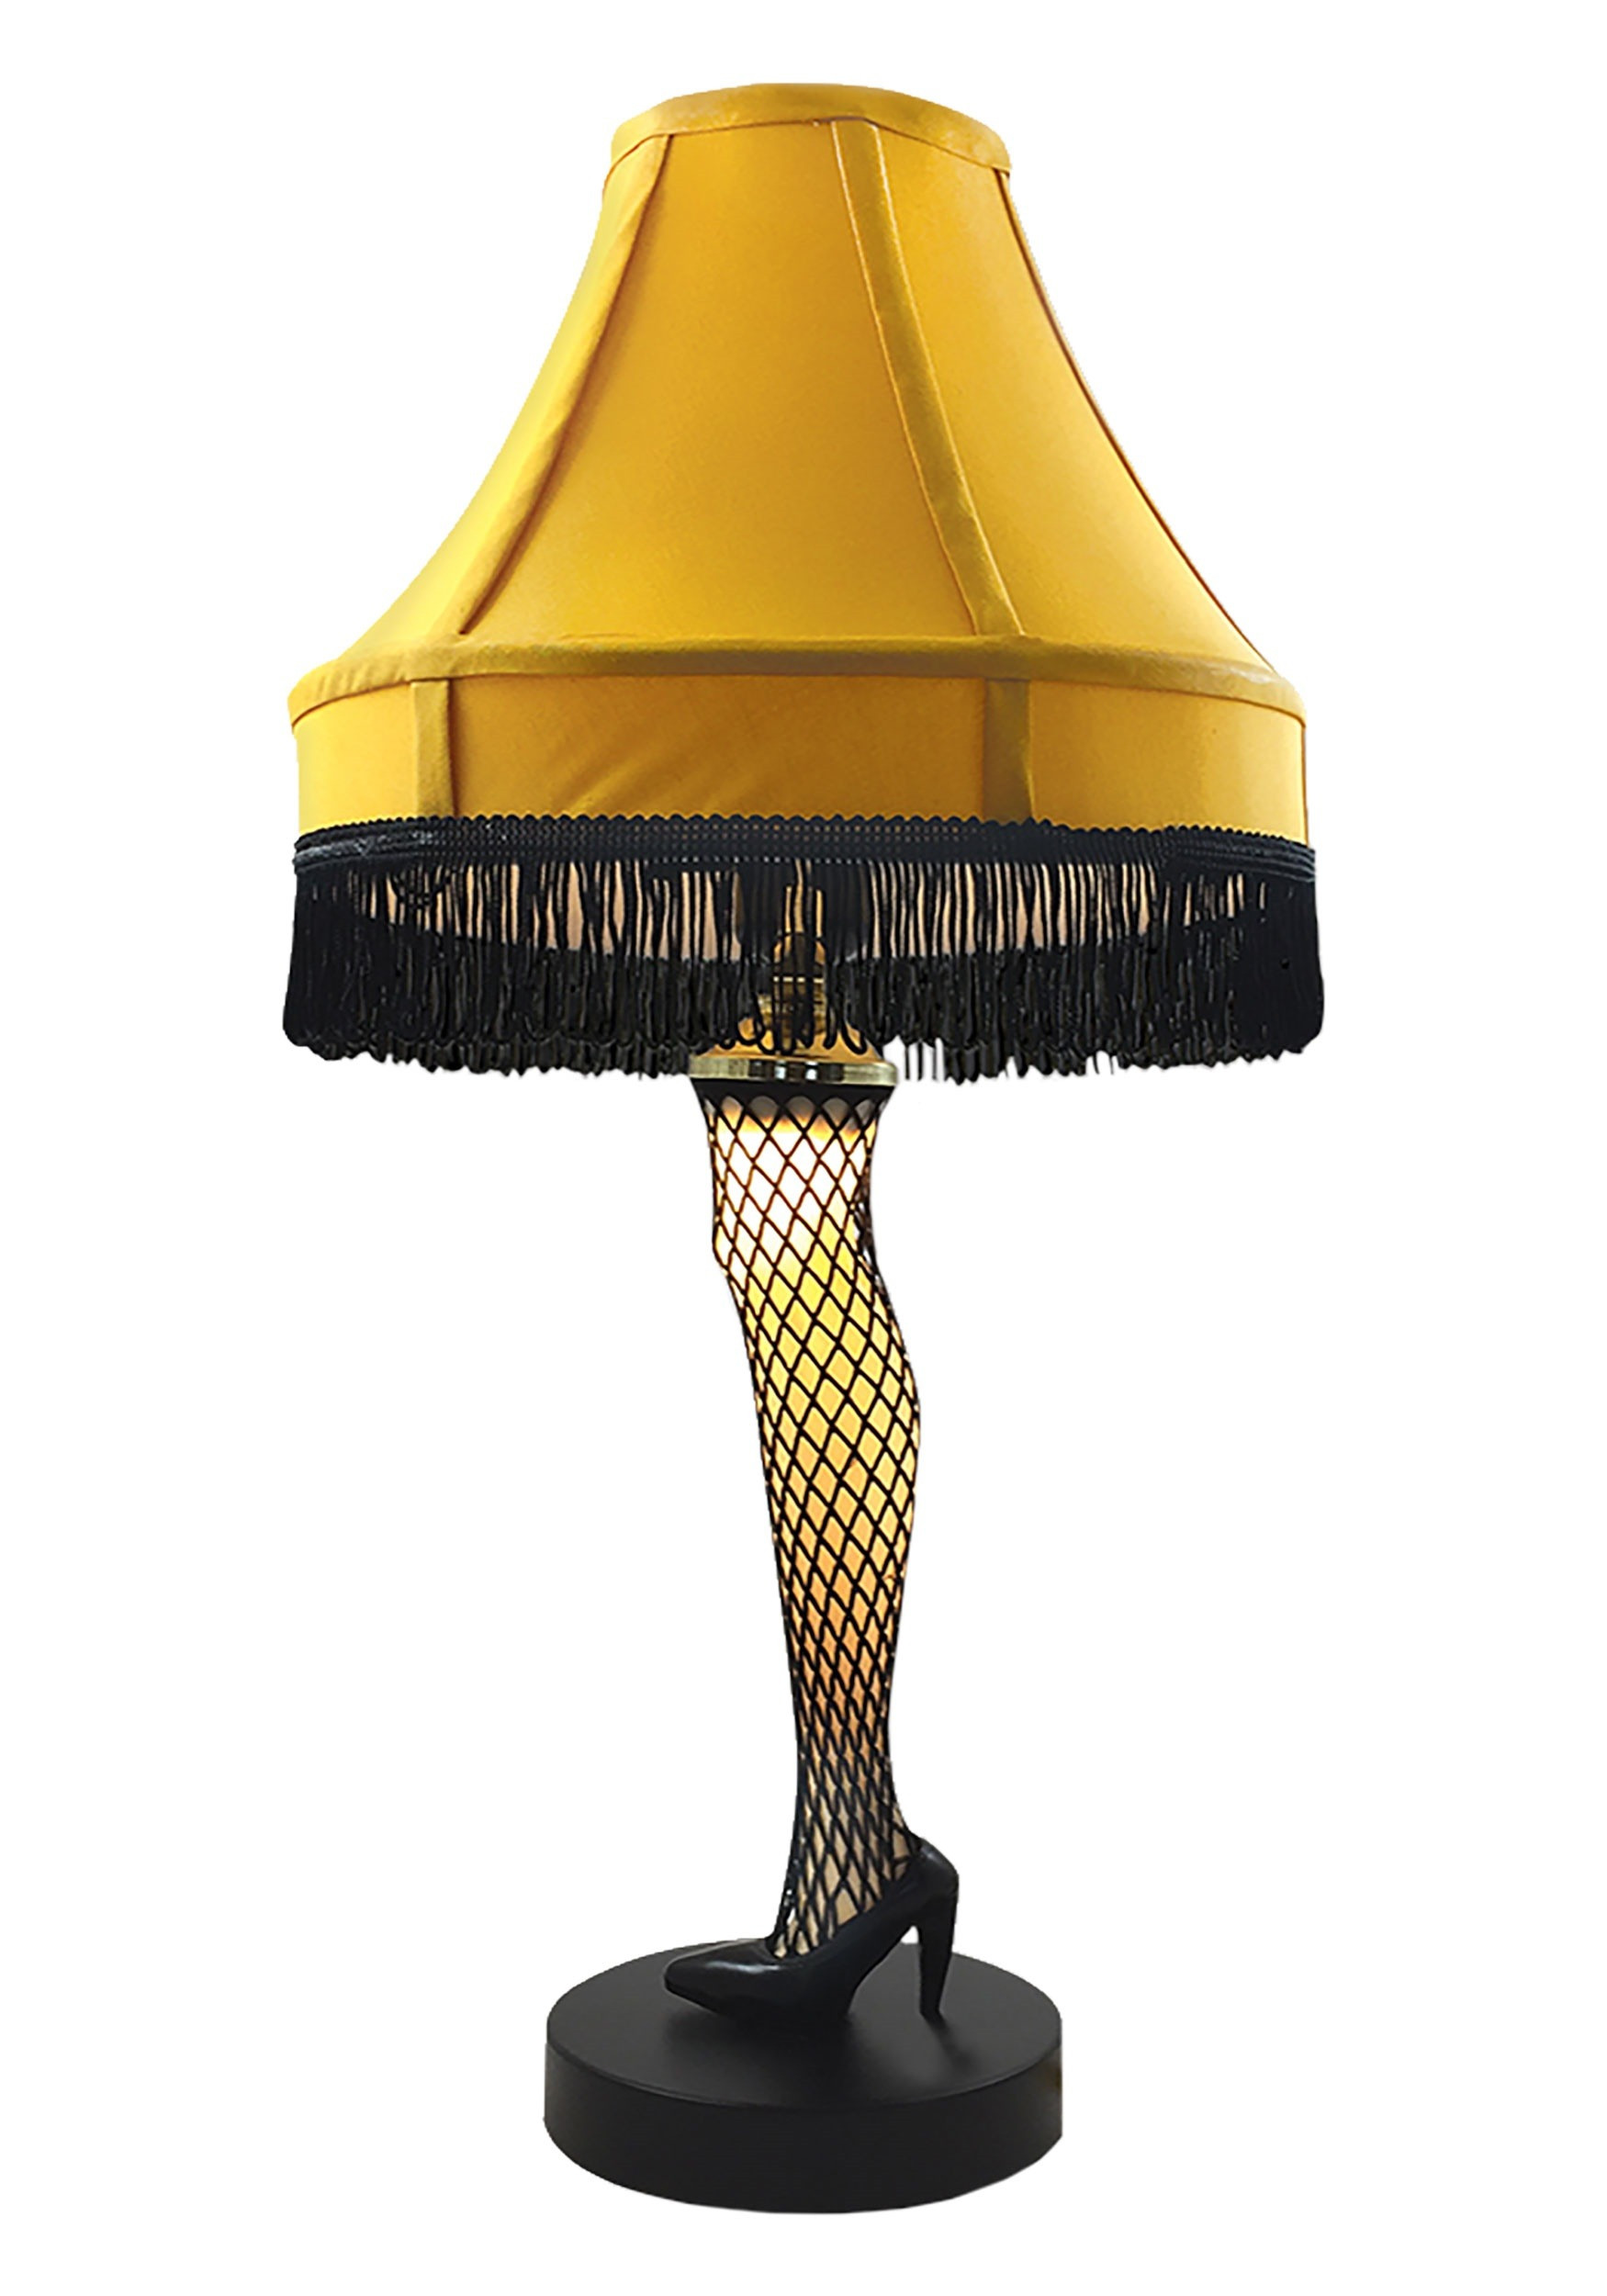 Christmas Story Lamp For Sale
 A Christmas Story 21" Leg Lamp in Box